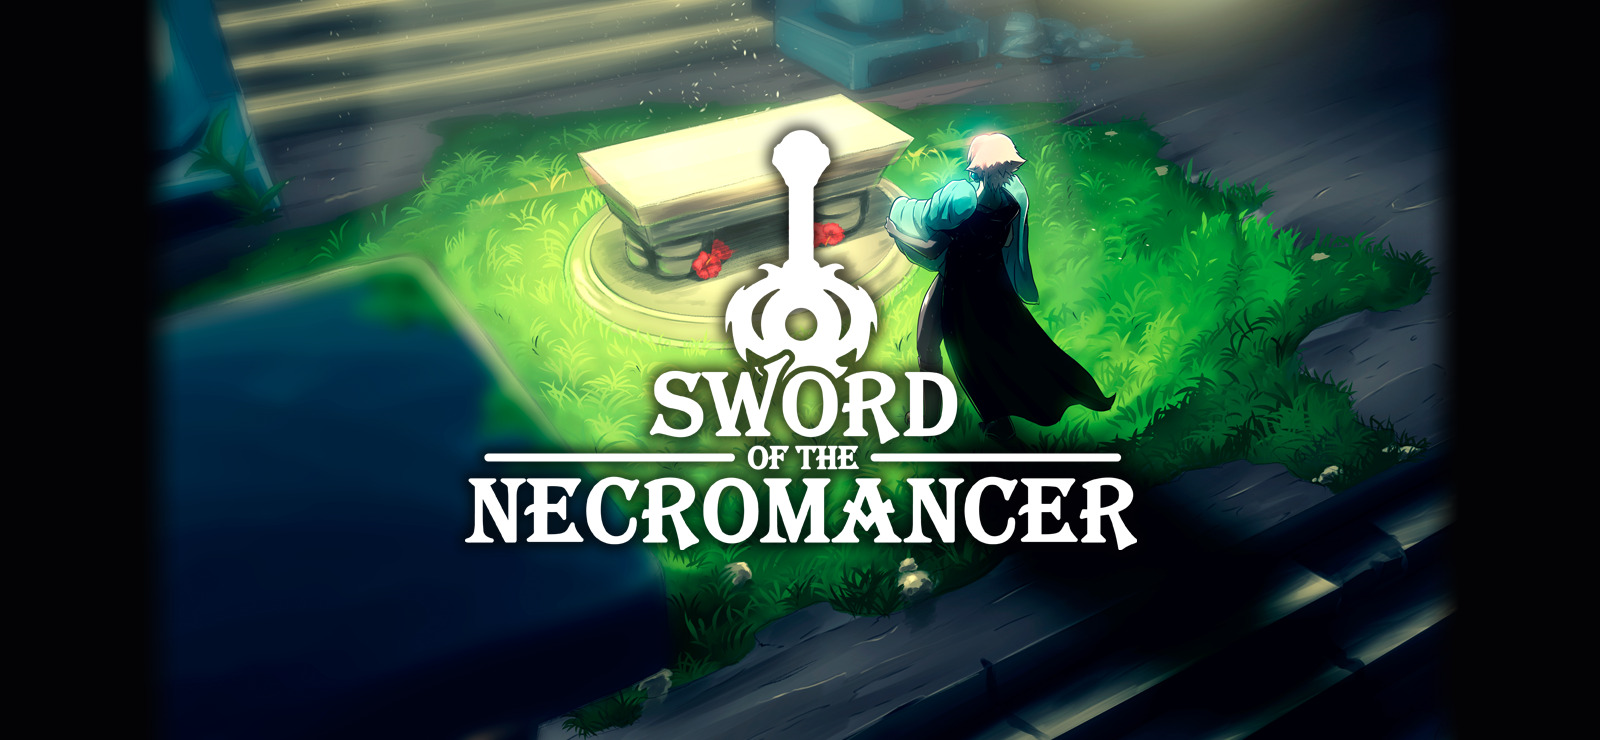 sword of the necromancer rating